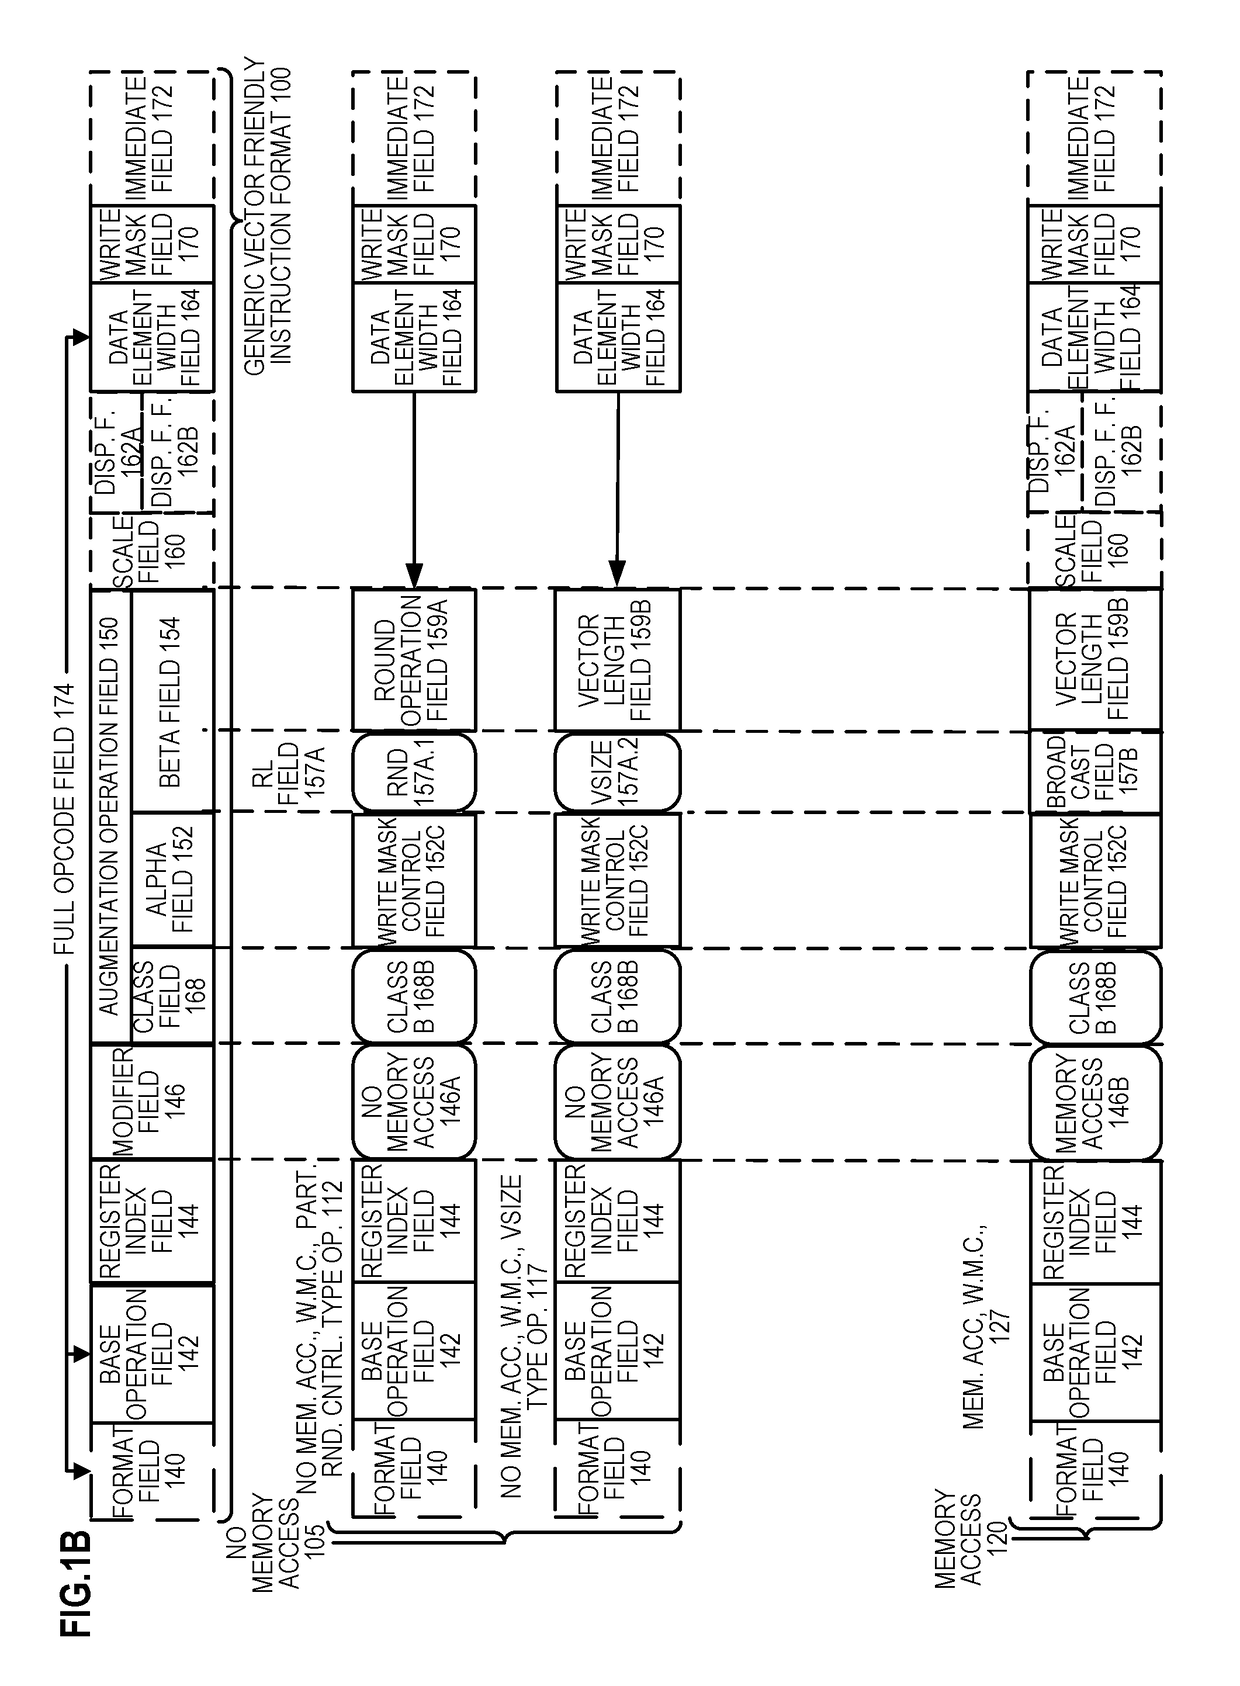 Apparatus and method for accelerating graph analytics